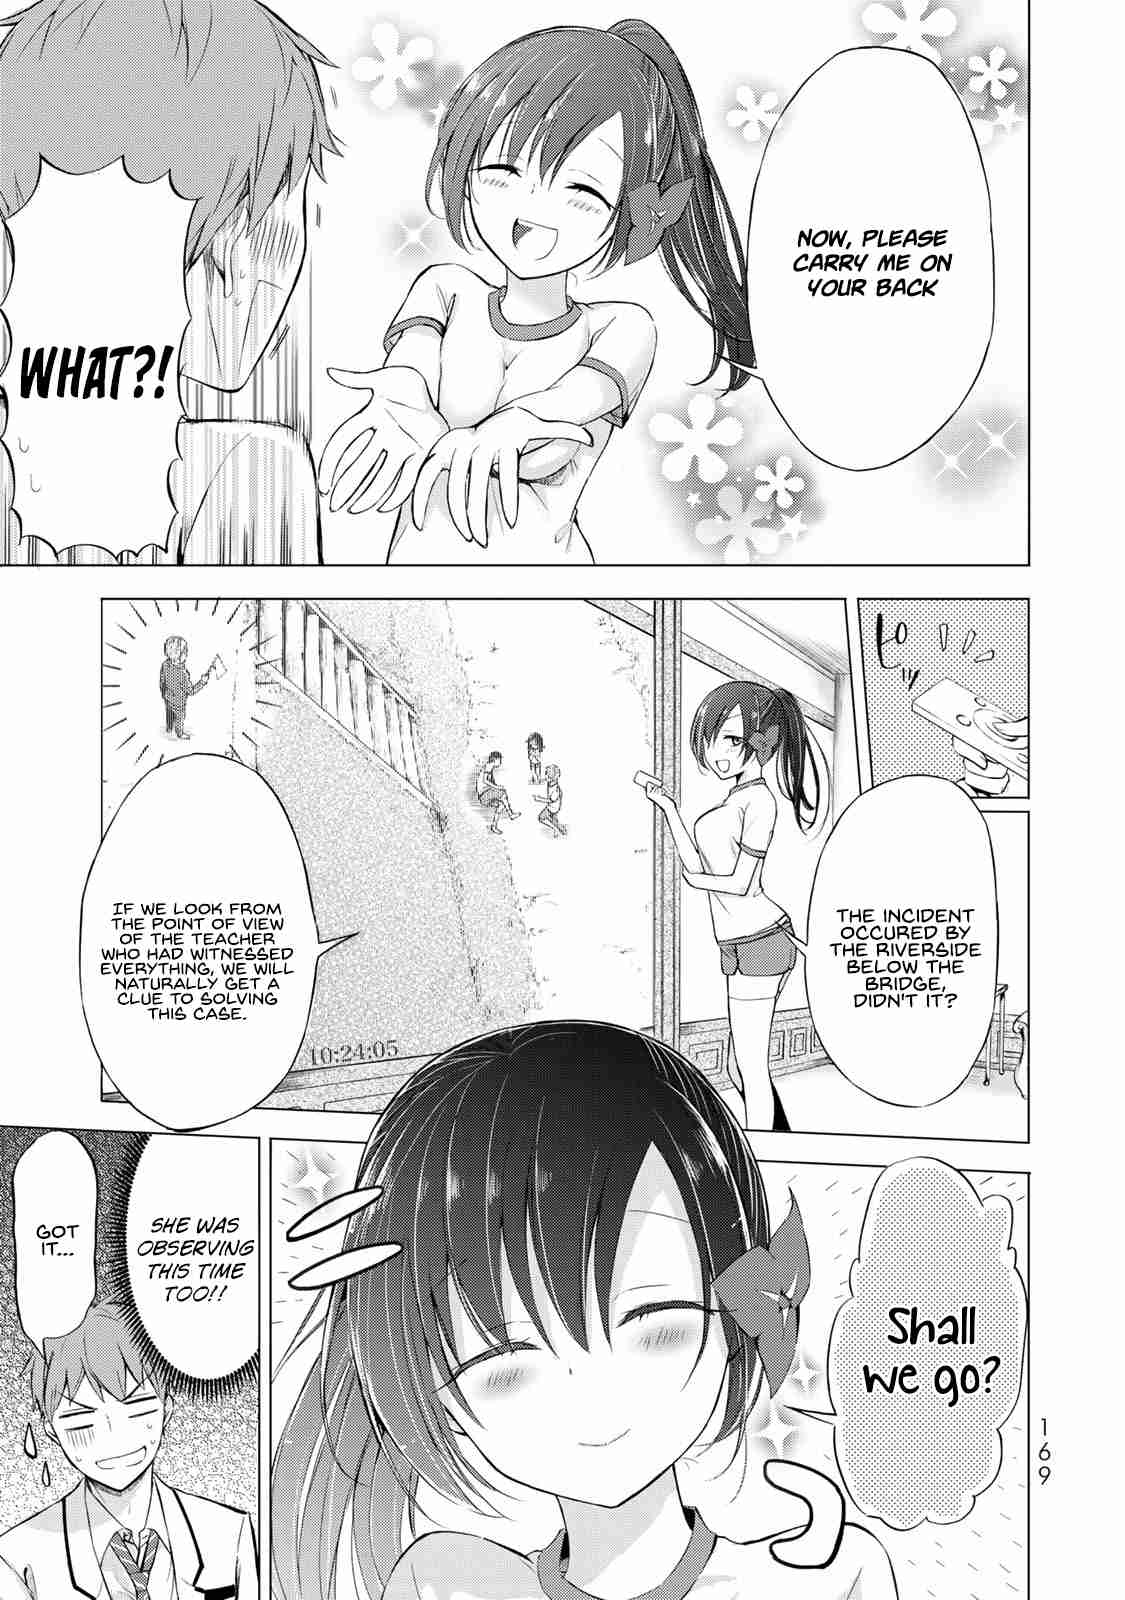 The Student Council President Solves Everything on the Bed Vol. 1 Ch. 4 Accident at the Marathon Part 1